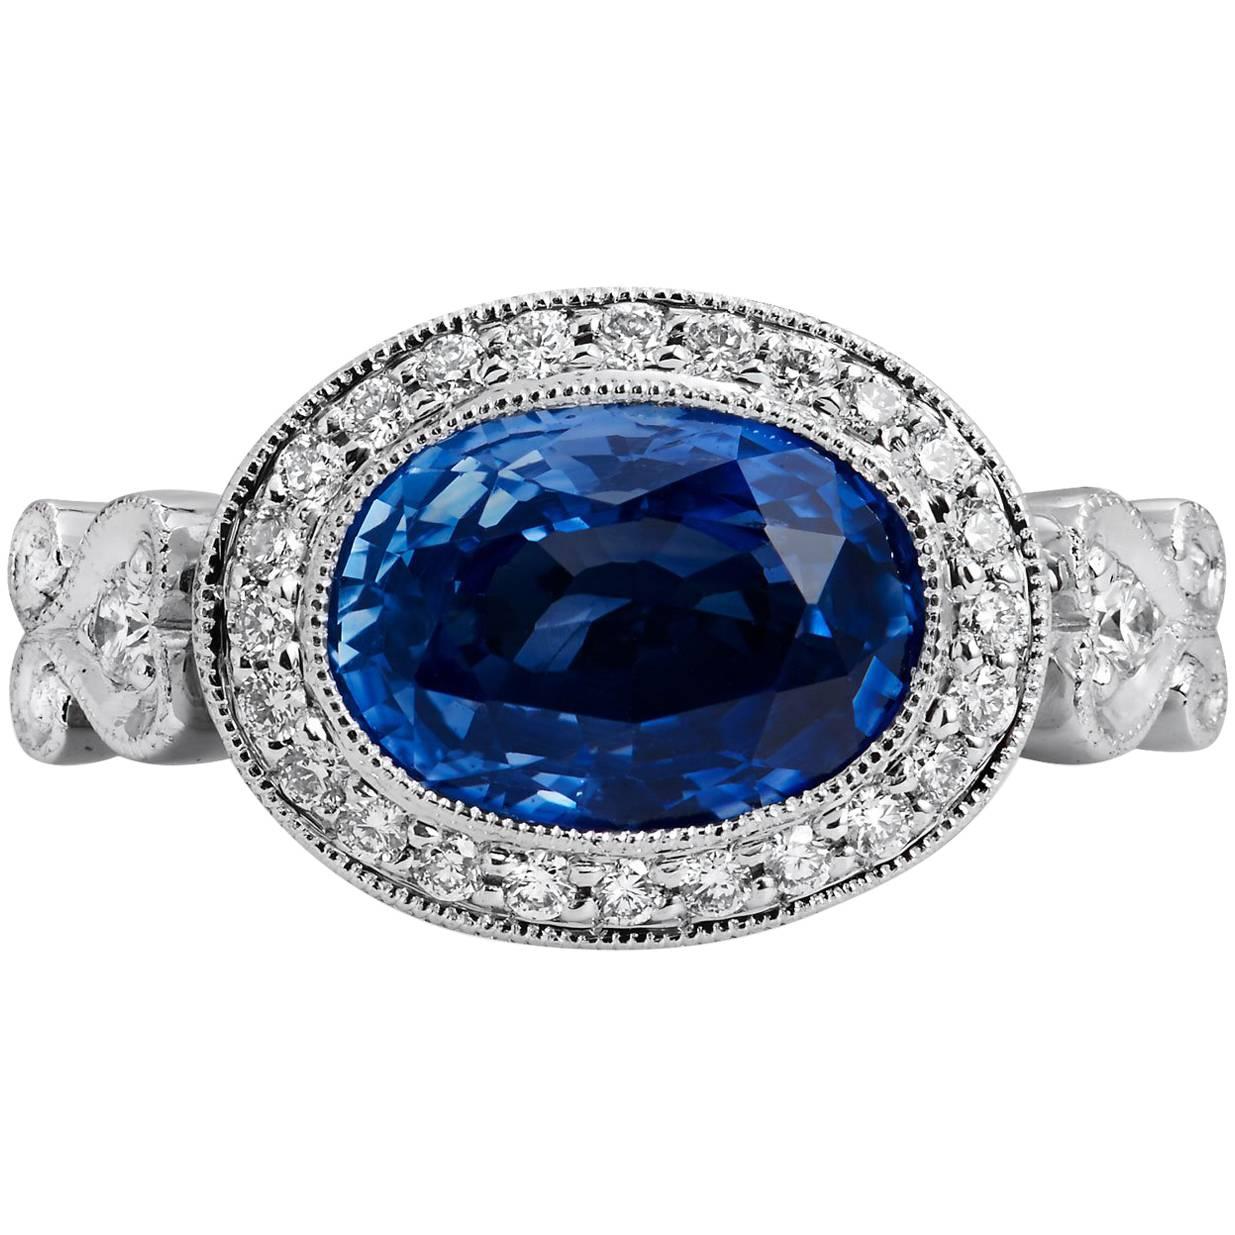 H & H 4.18 Carat Oval Sapphire and Diamond Pave Ring For Sale